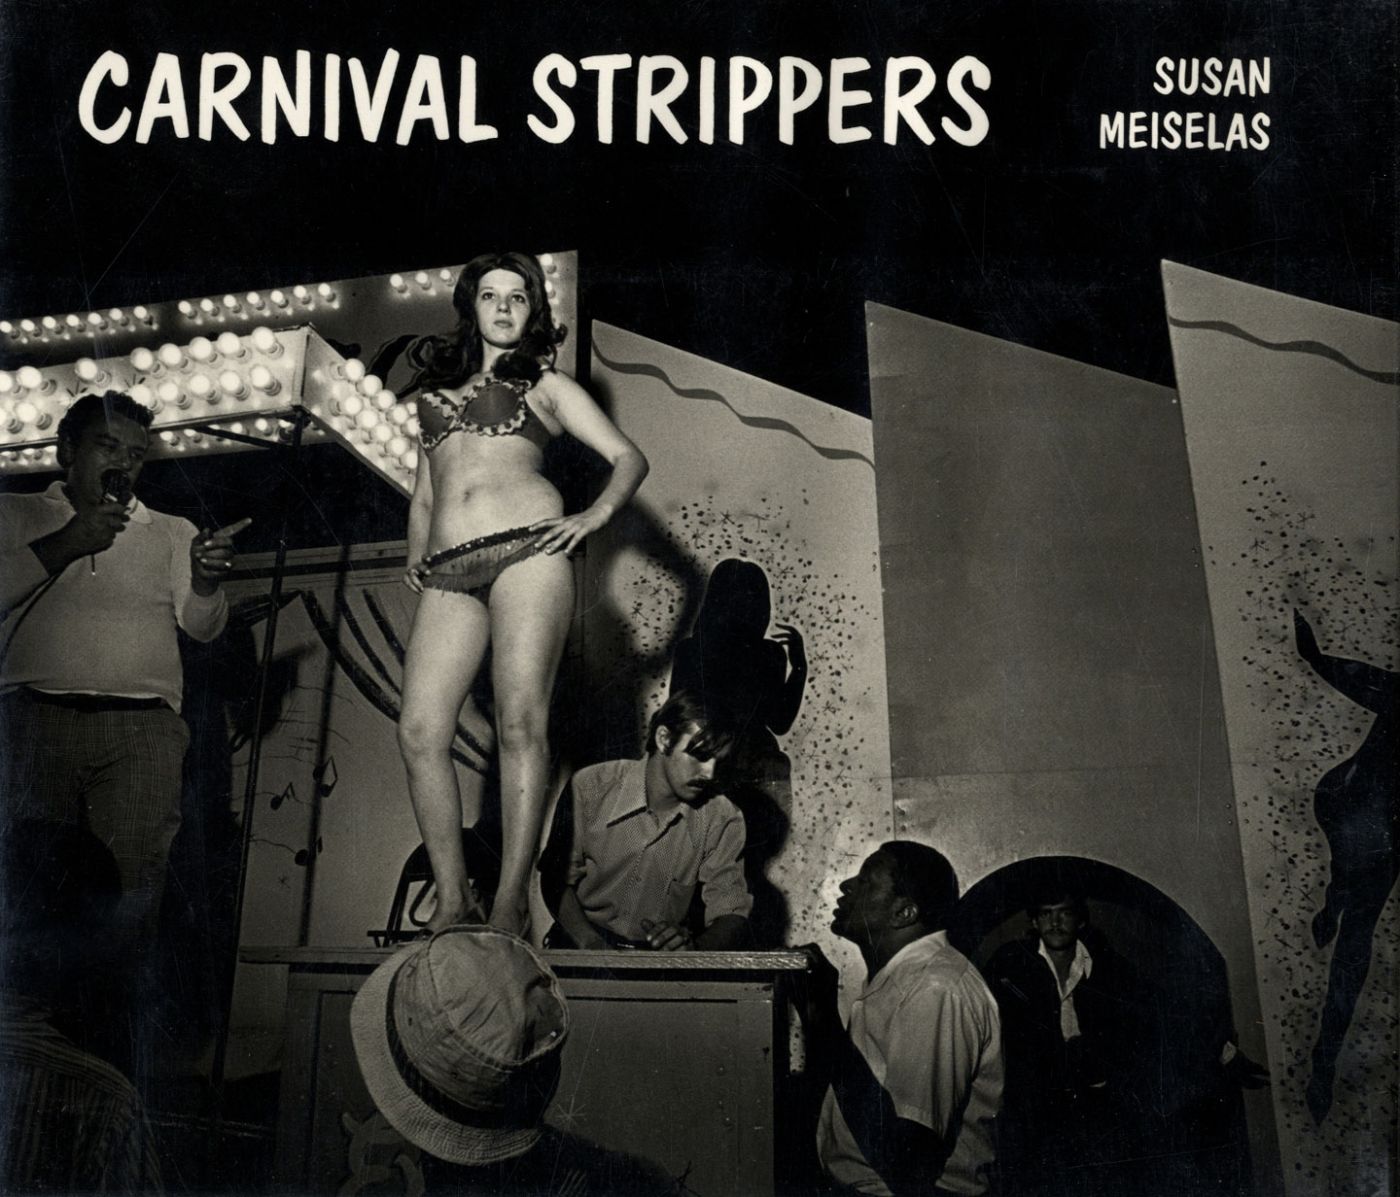 Meiselas ; Canrbival ; strippers ; streaptease ; book ; témoignage ; 